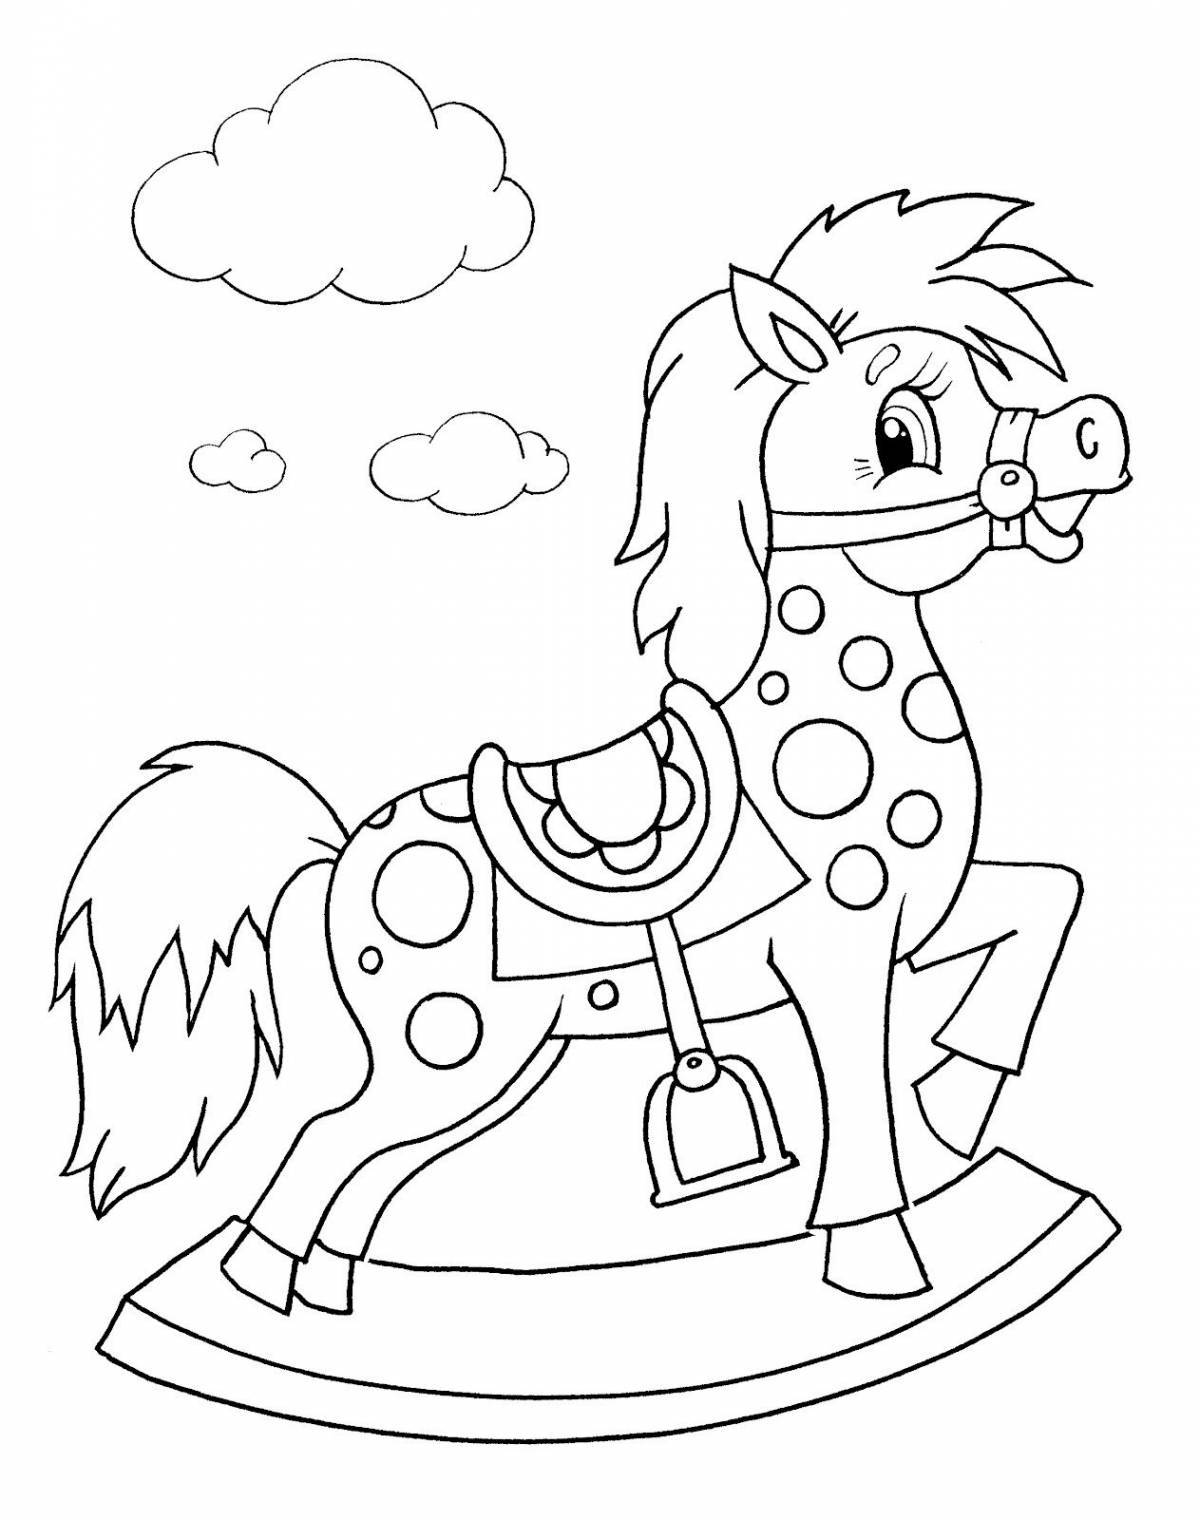 Color-frenzy coloring page for children 6-7 years old